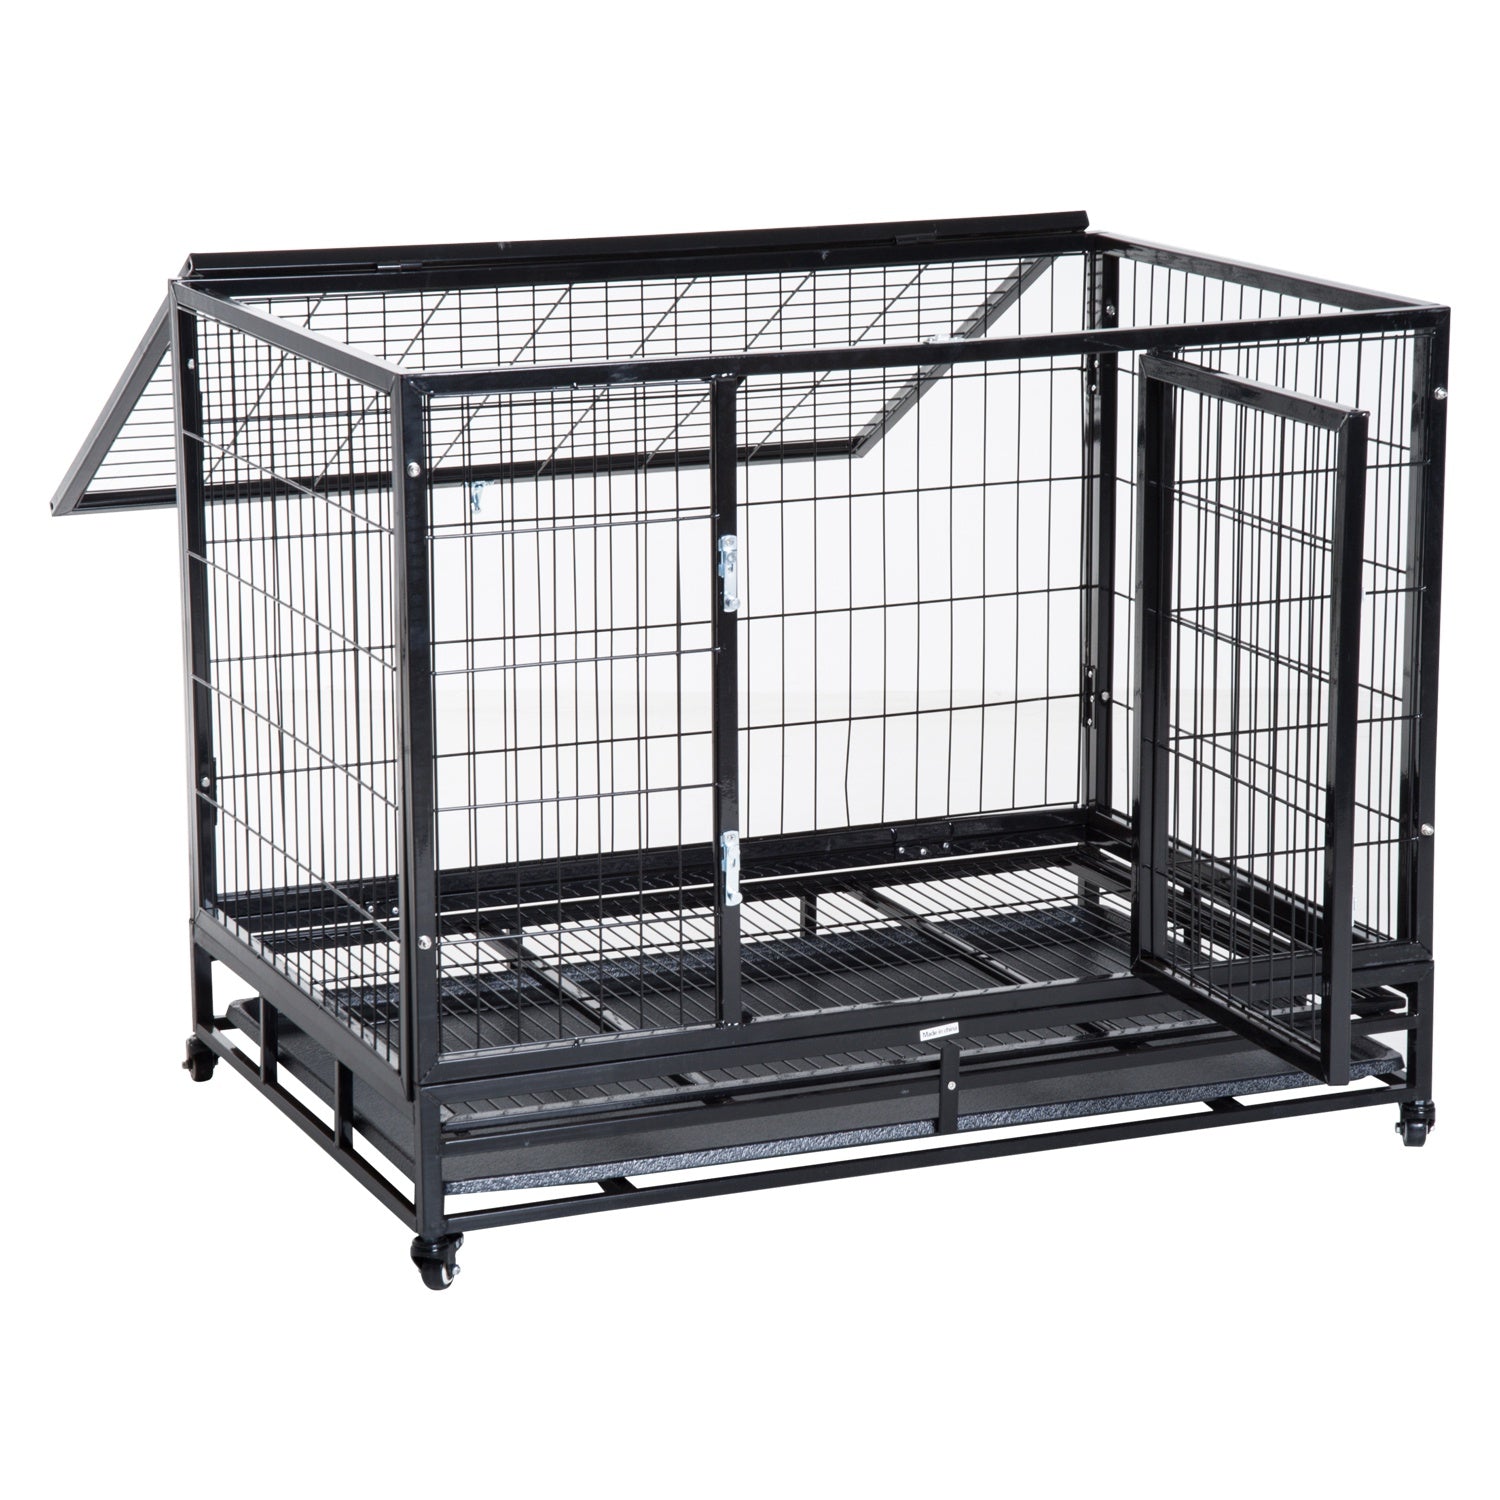 Metal Kennel Cage W/Wheels and Crate Tray, 109Lx76Wx87H cm